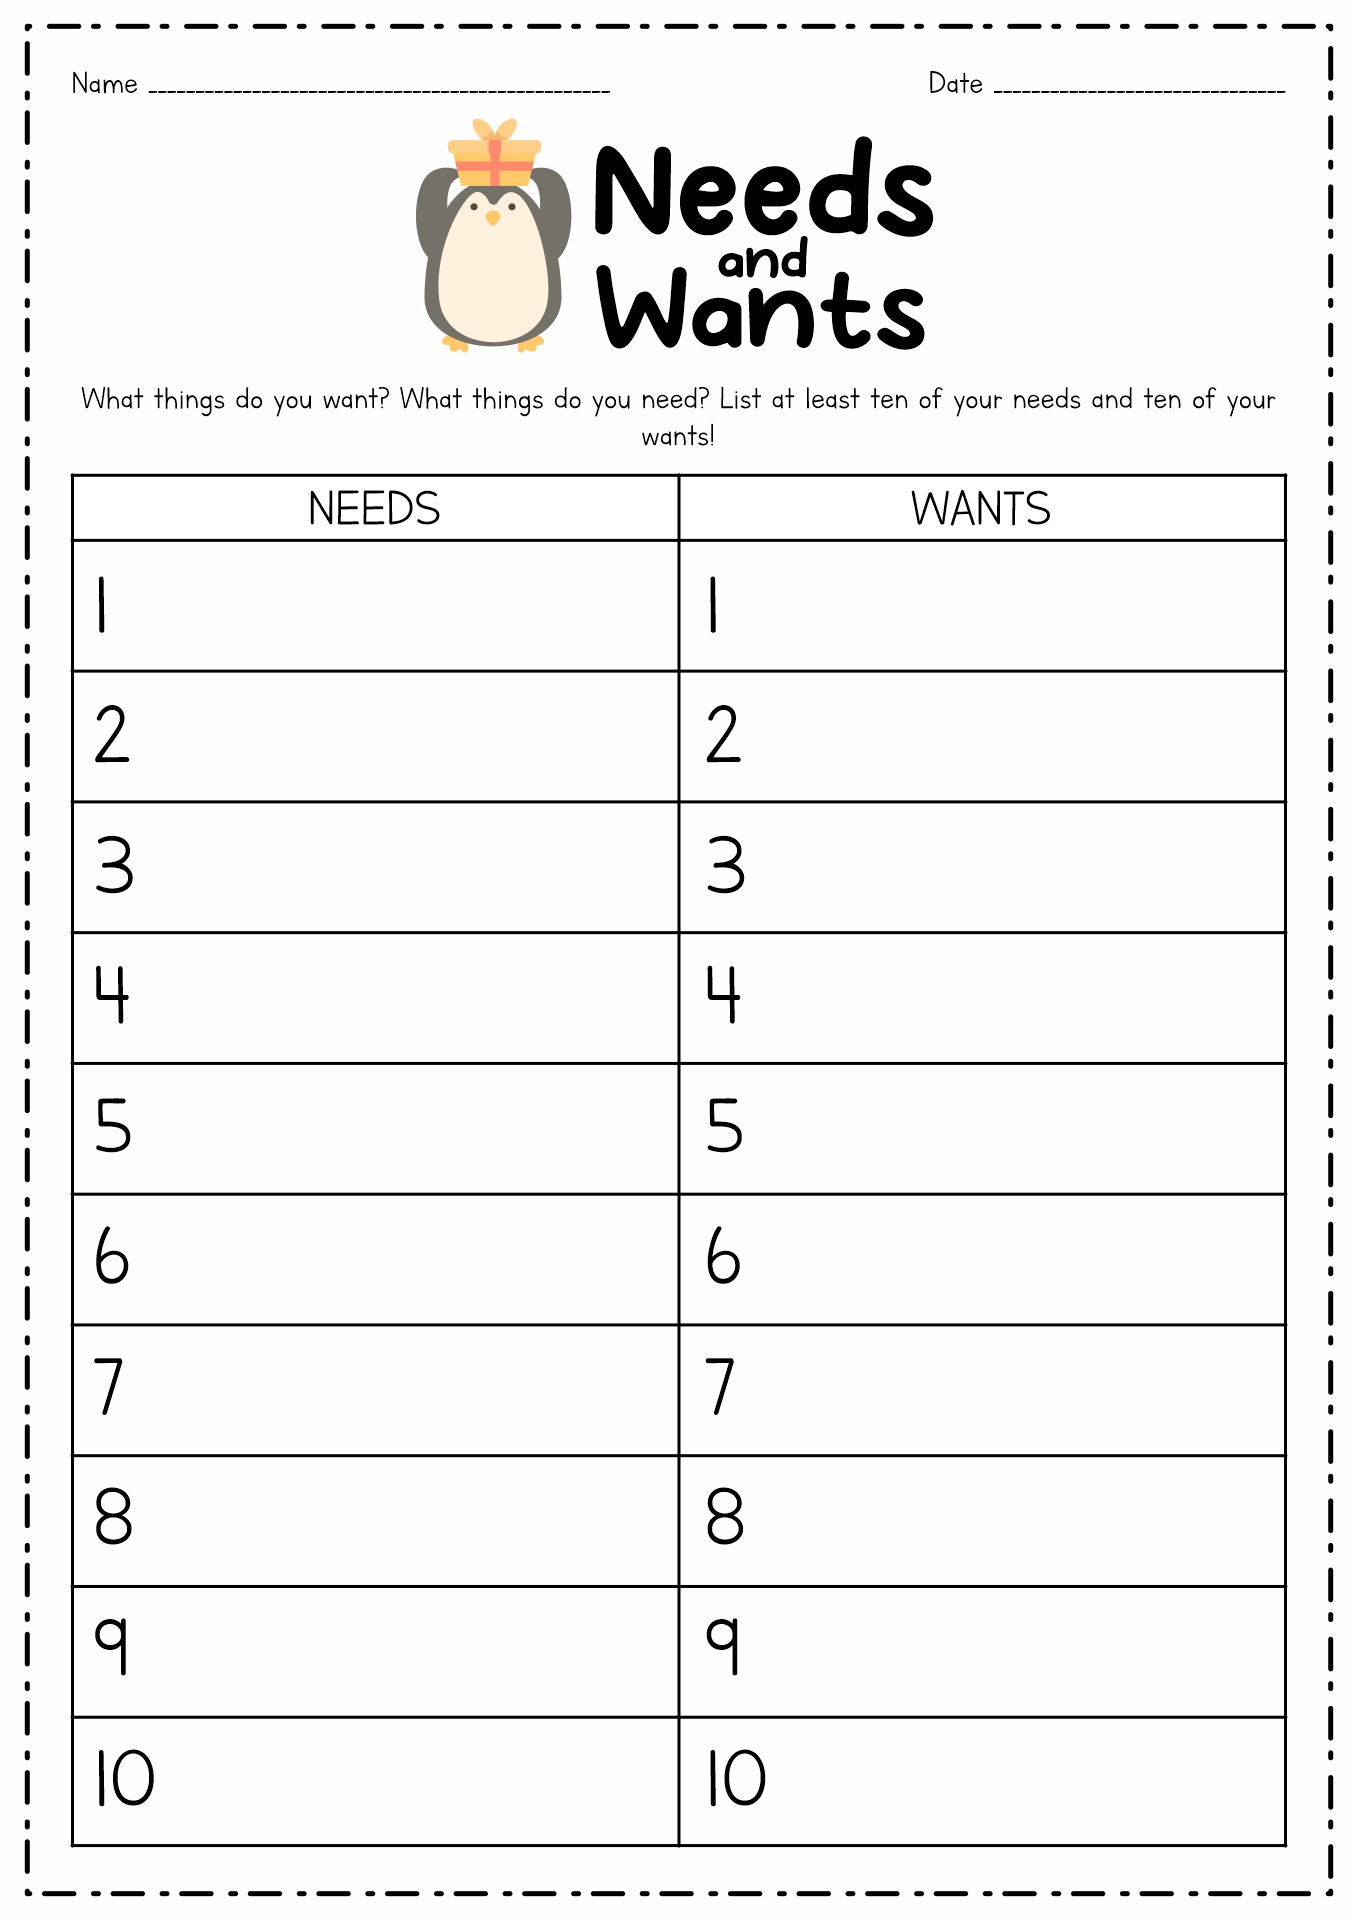 Printable Needs and Wants Worksheets Image